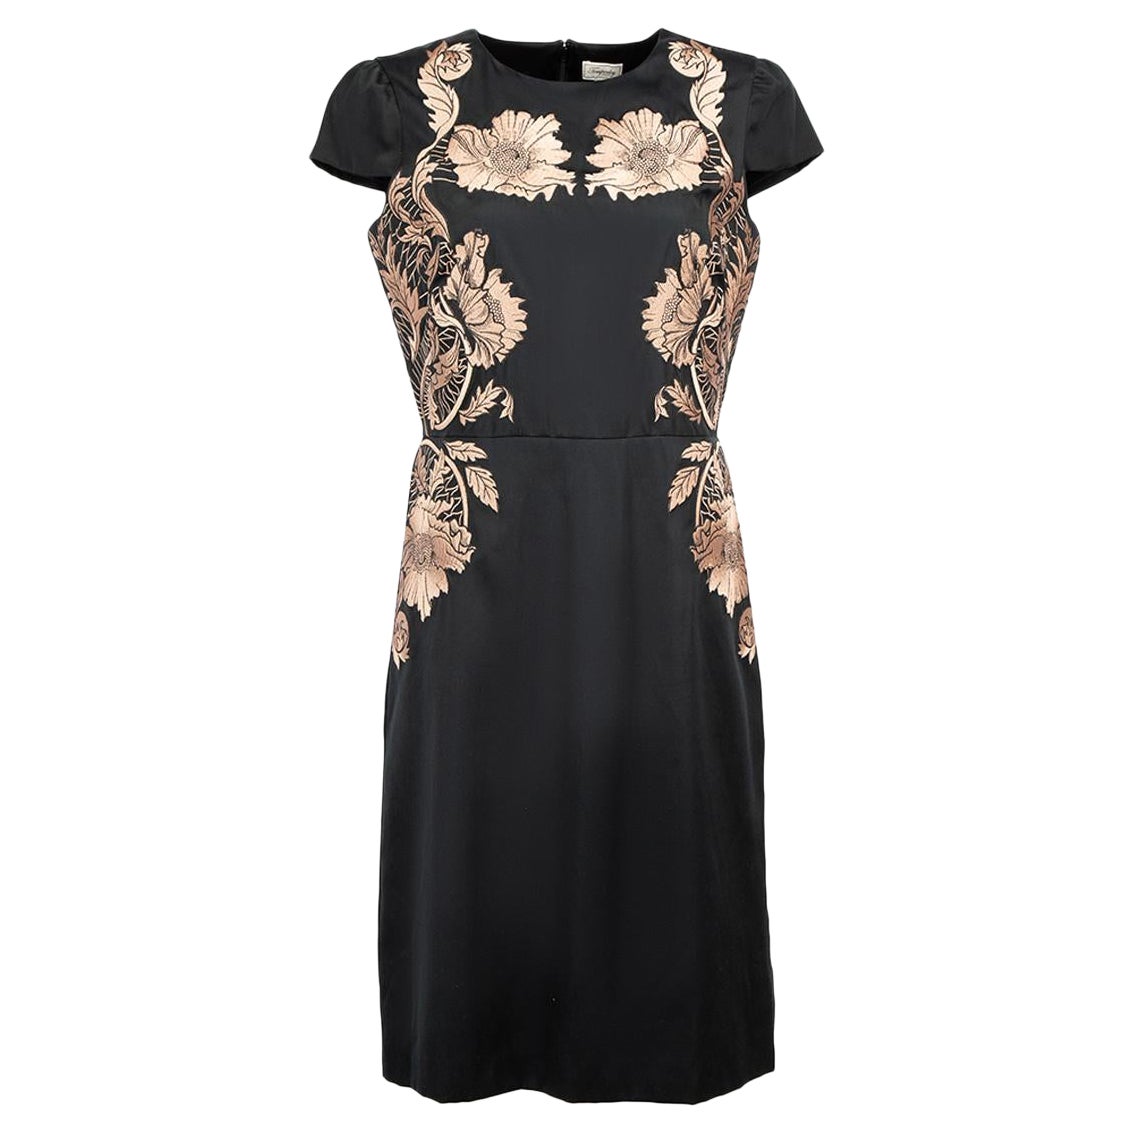 Black Floral Embroidery Dress Size L For Sale